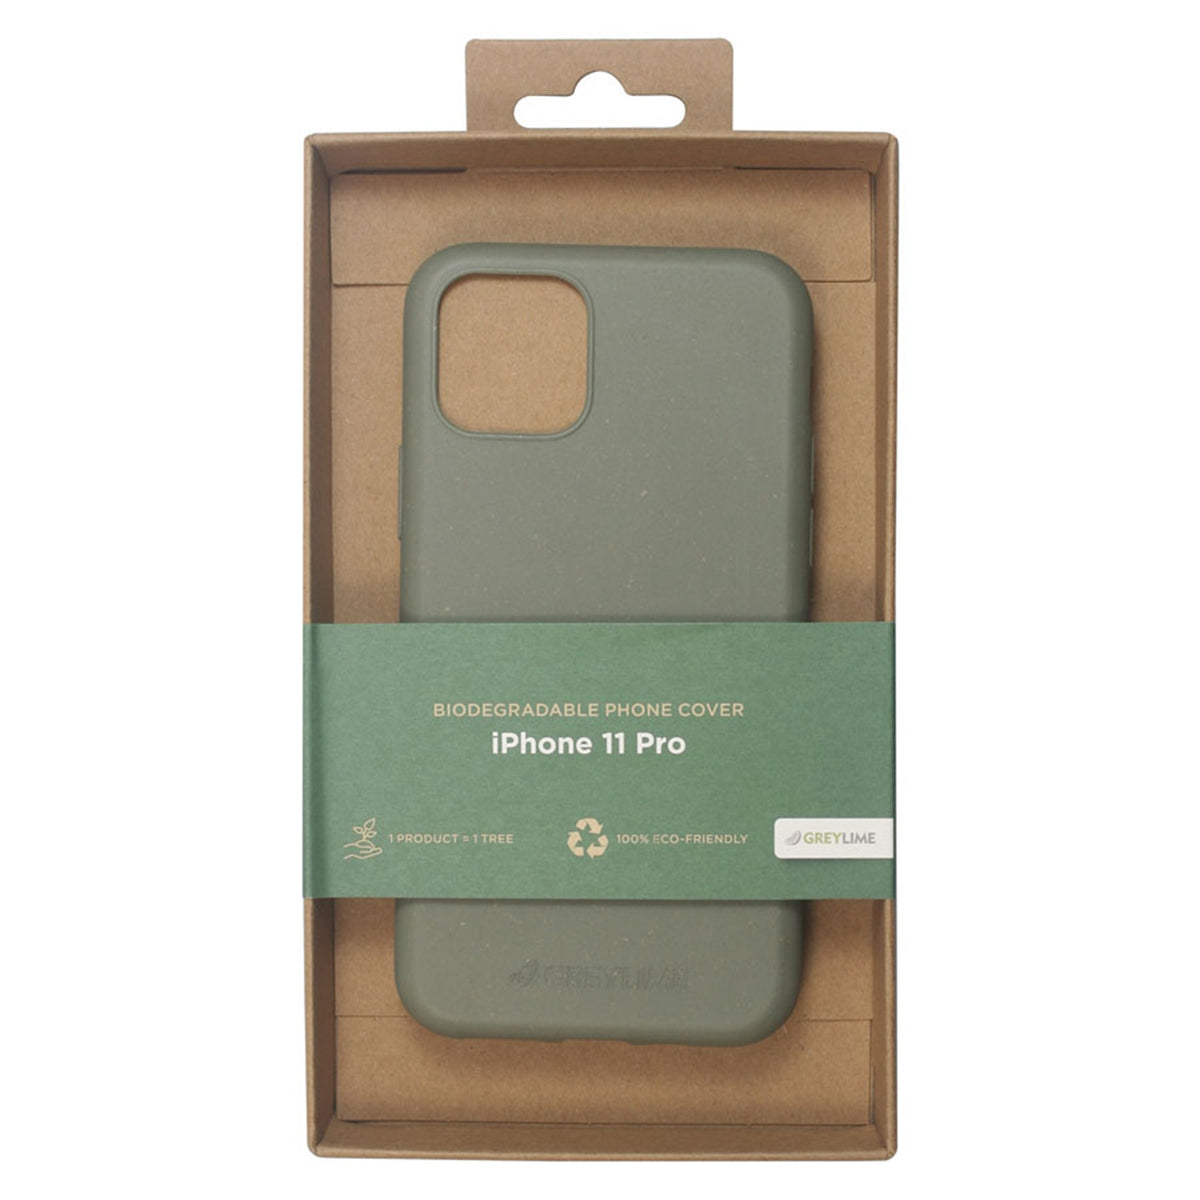 COIP11P07 Greylime Iphone 11 Pro Biodegradable Cover Green 6